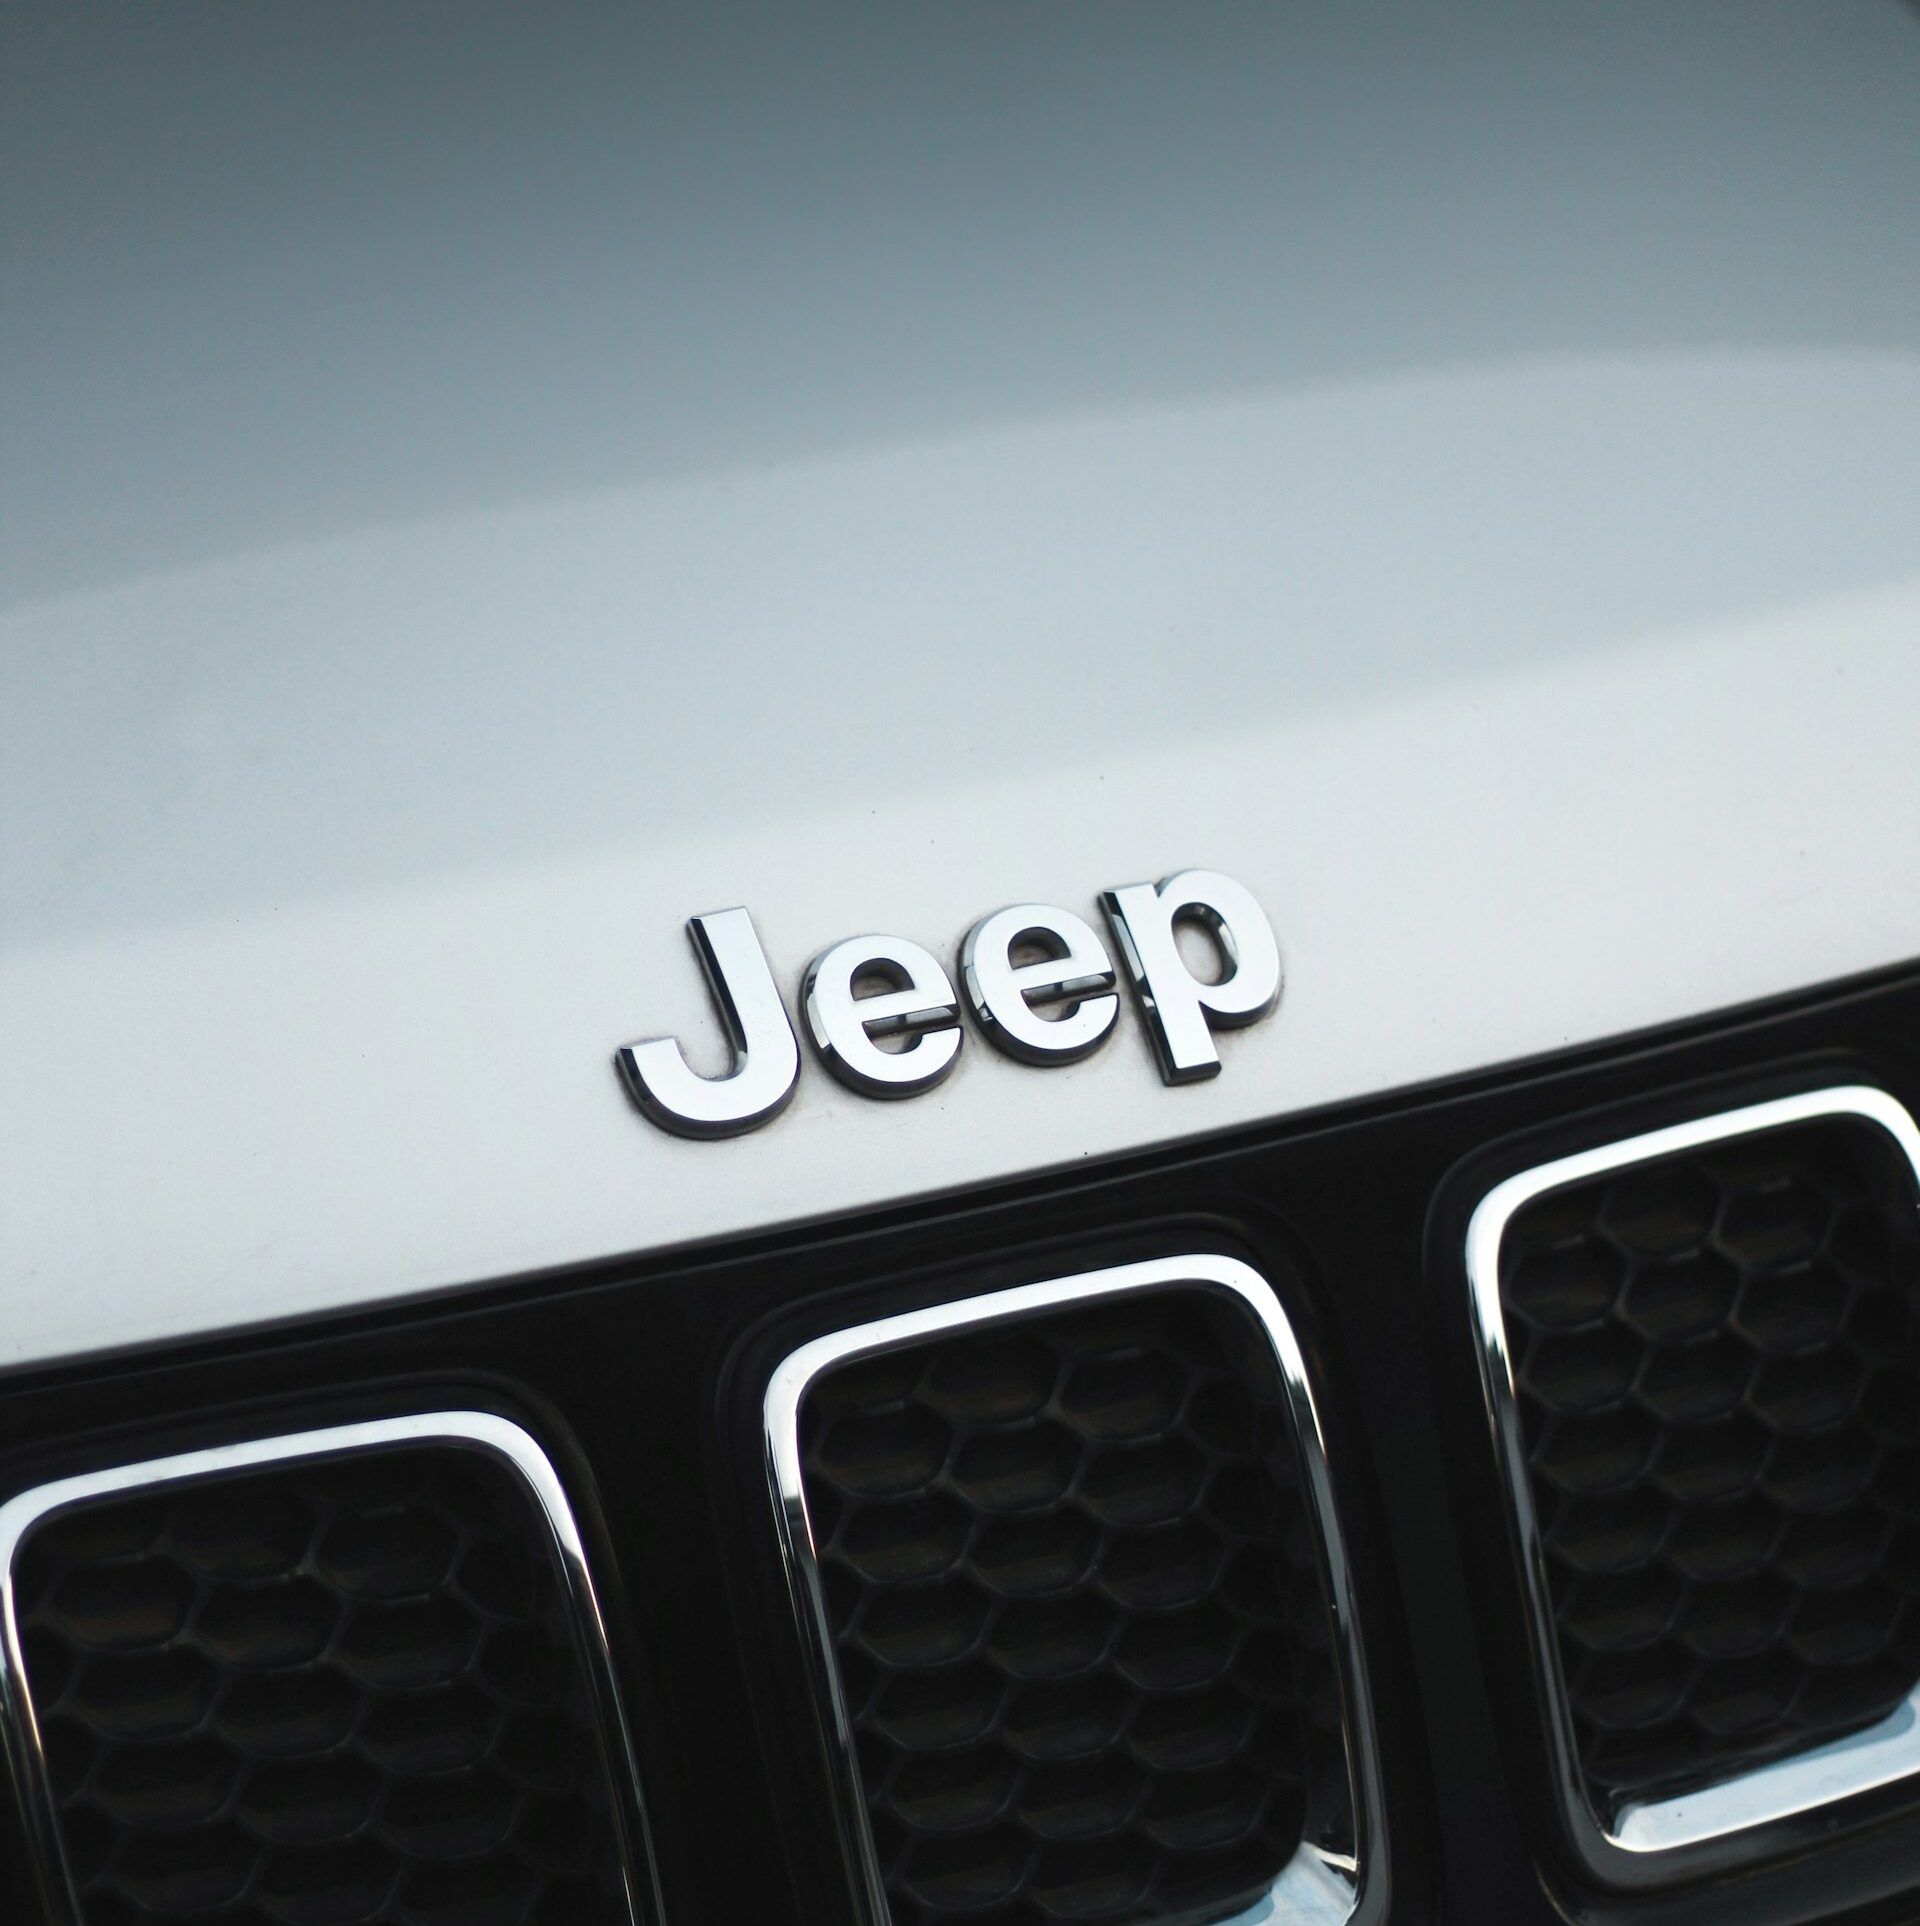 The Jeep logo, featuring a stylized grille with seven vertical slots, sits on a plain background.